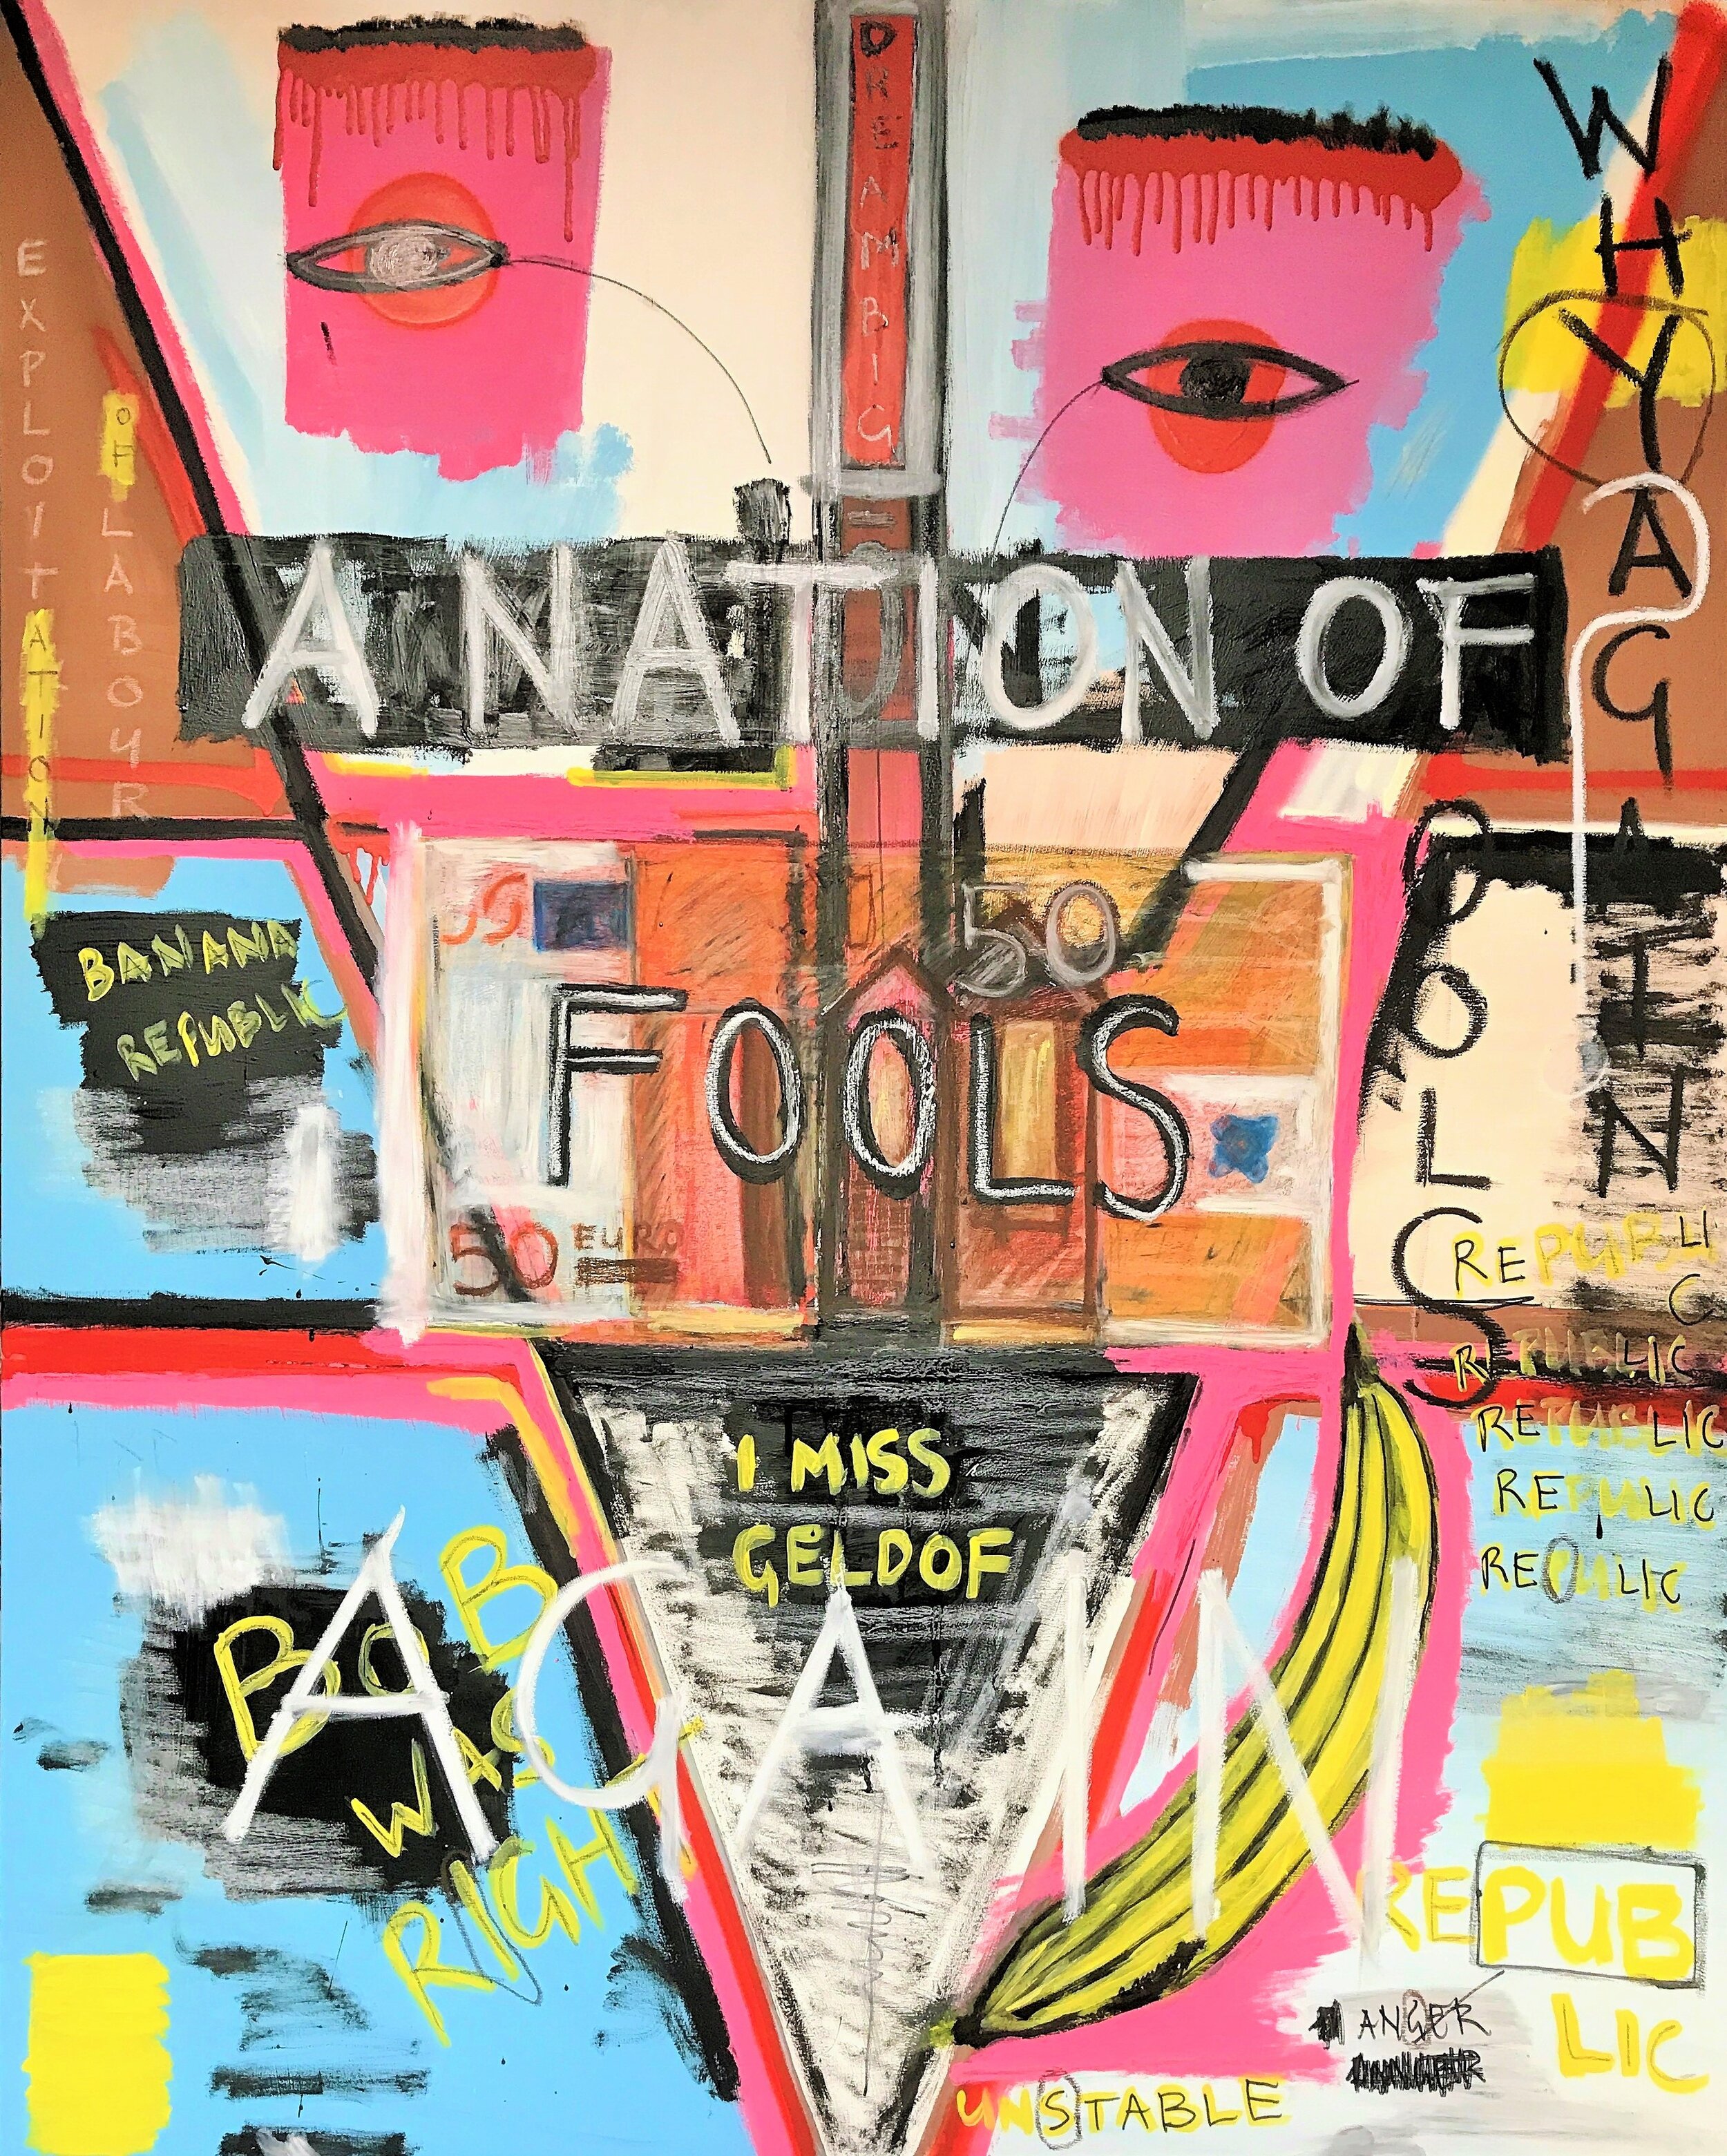 "A Nation of Fools" art by Irish artist PIGSY, neo-expressionist painting sold and in private art collection in Dublin, Ireland (Copy) (Copy) (Copy)